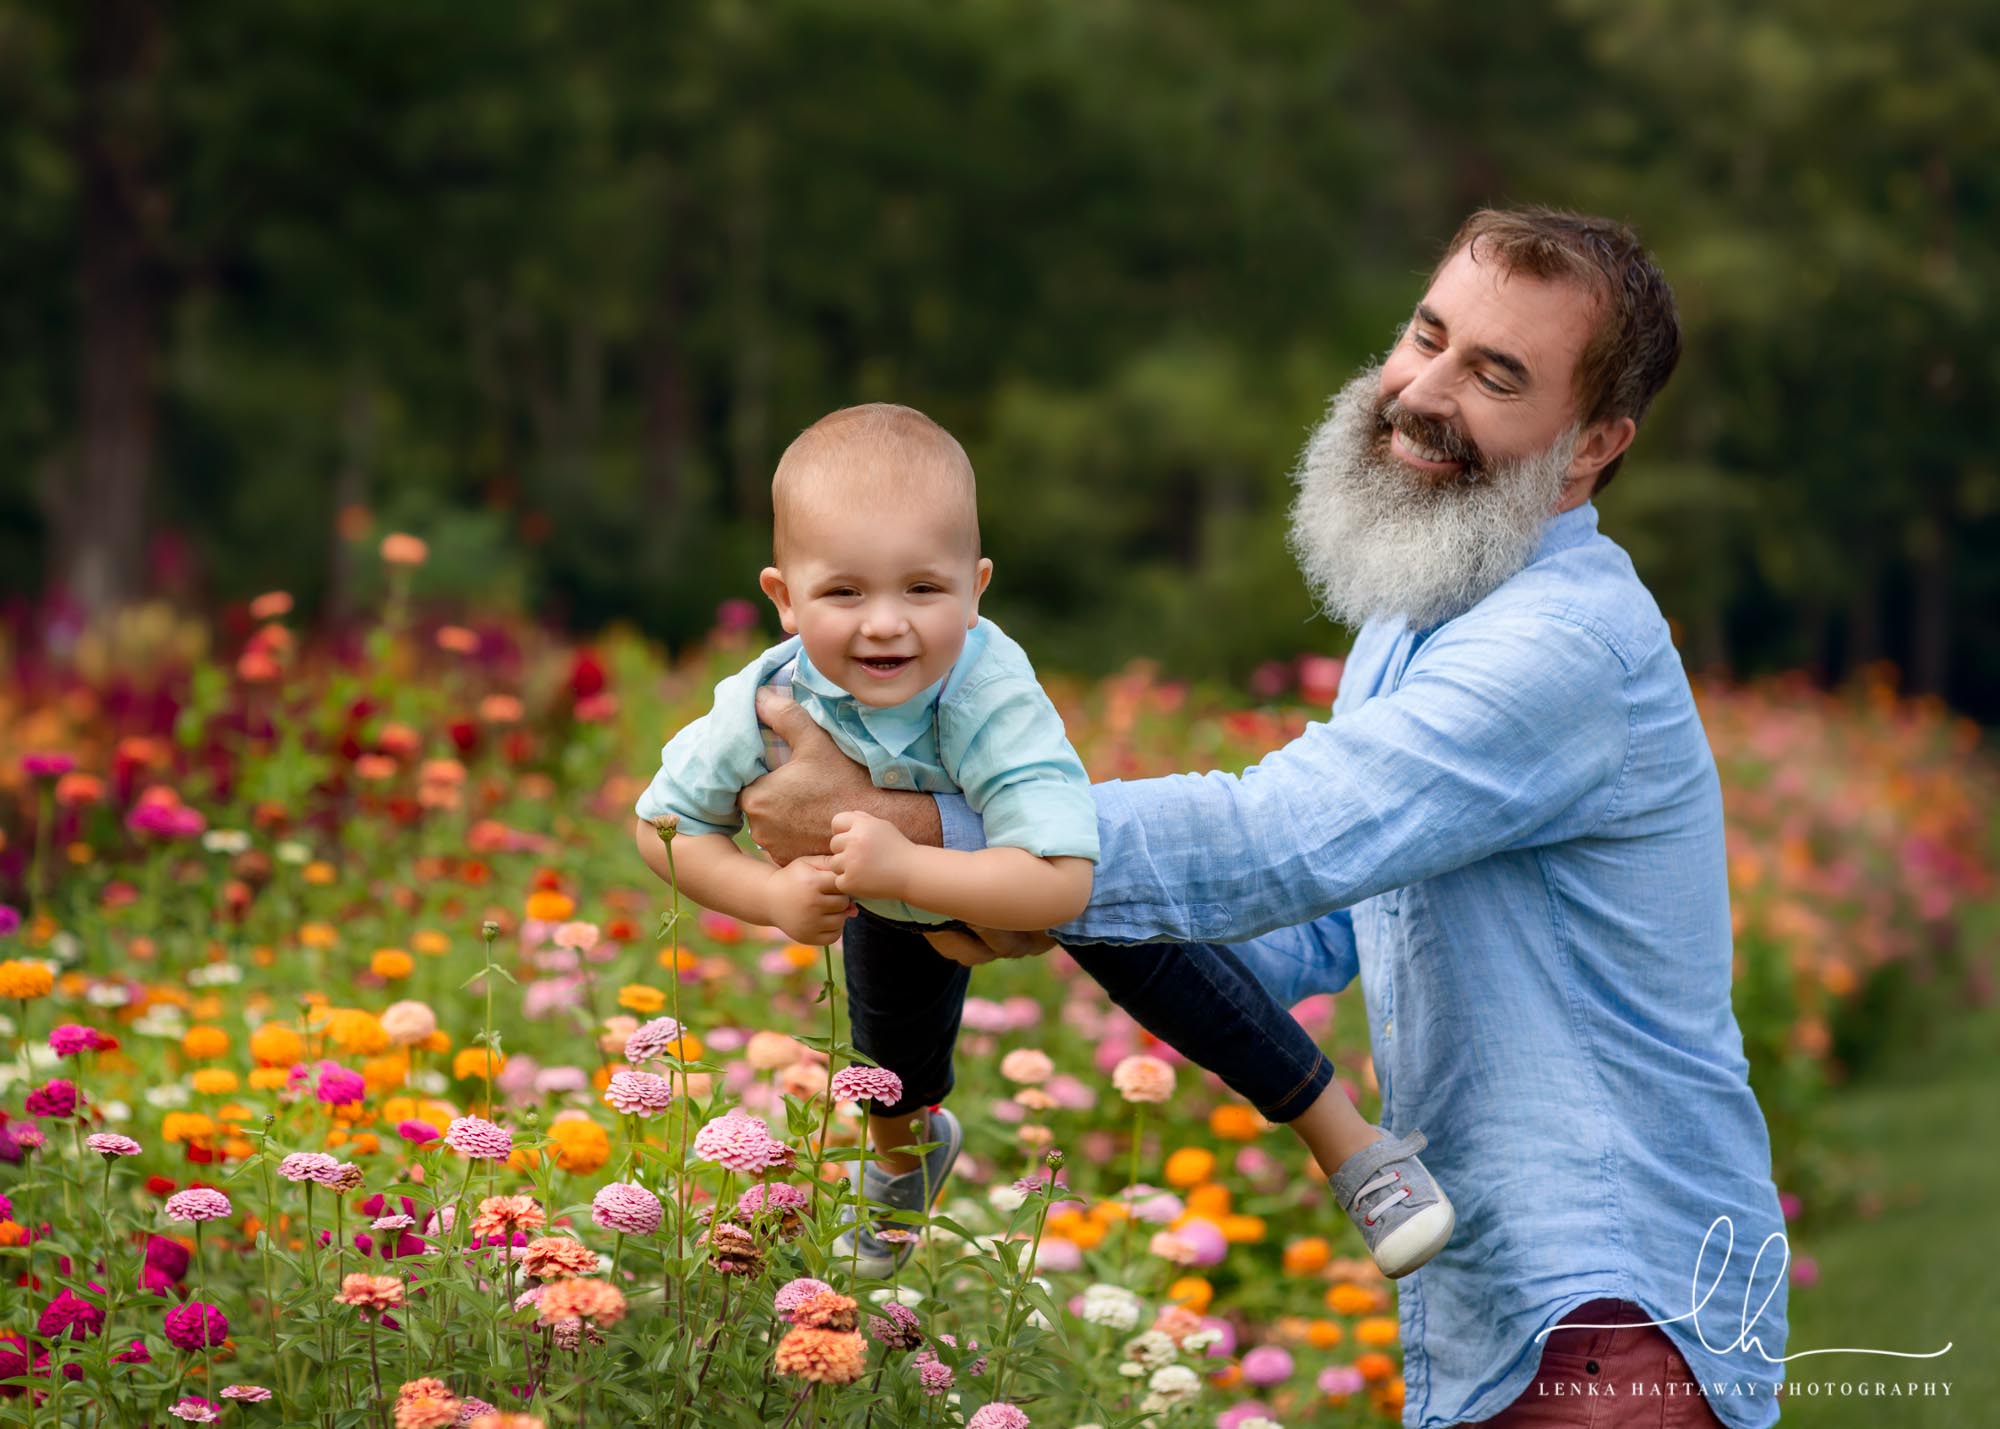 Summer family photos of a dad and son in flowers.